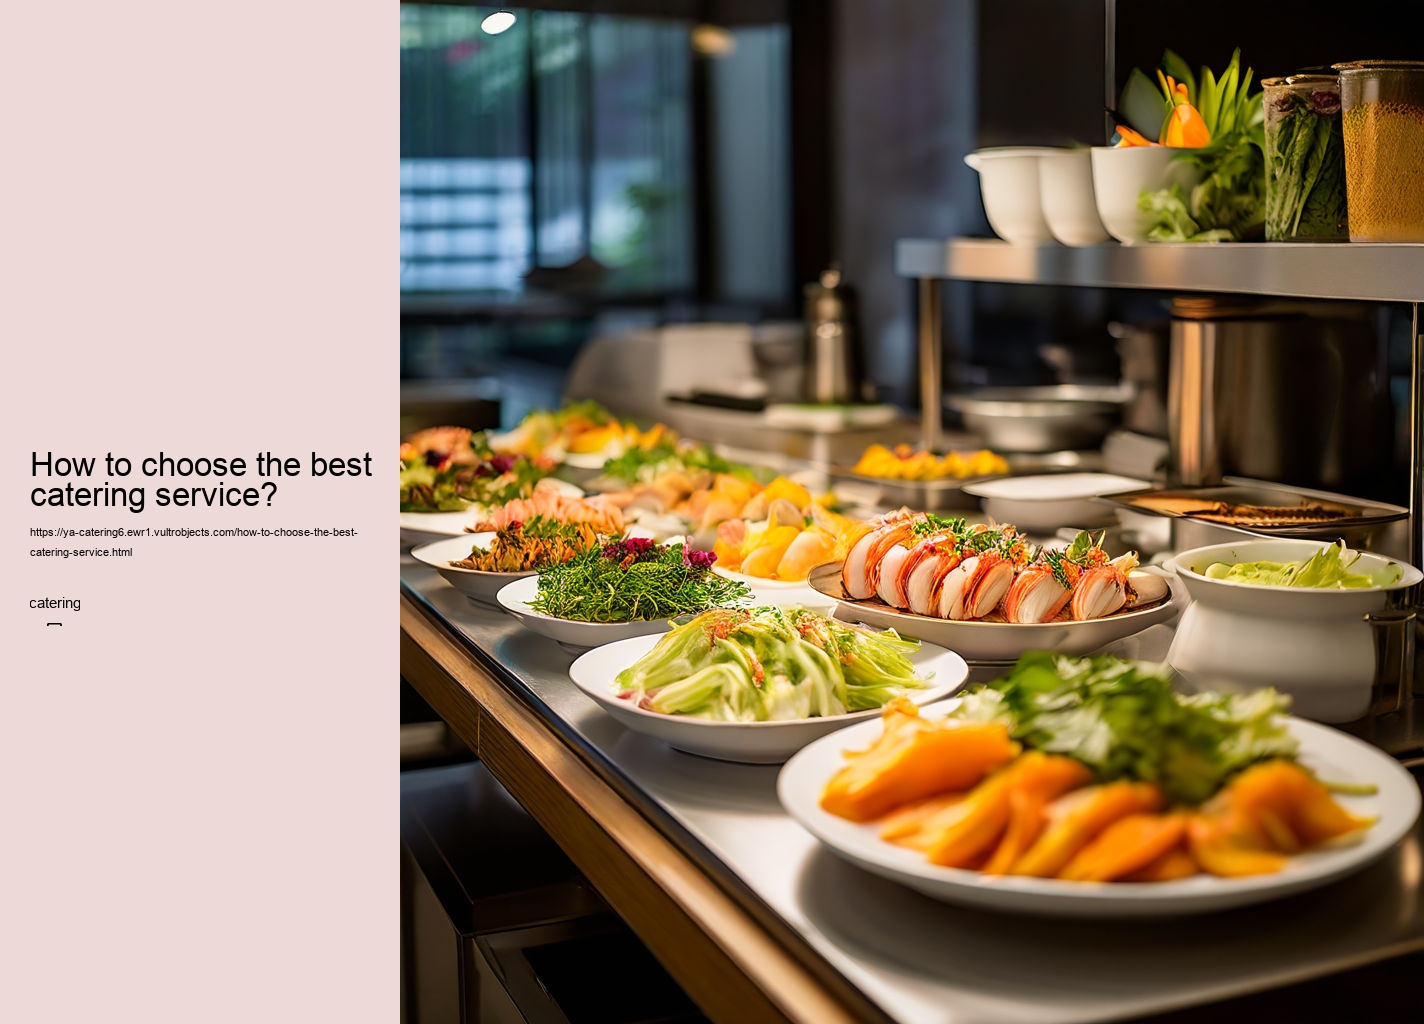 How to choose the best catering service?